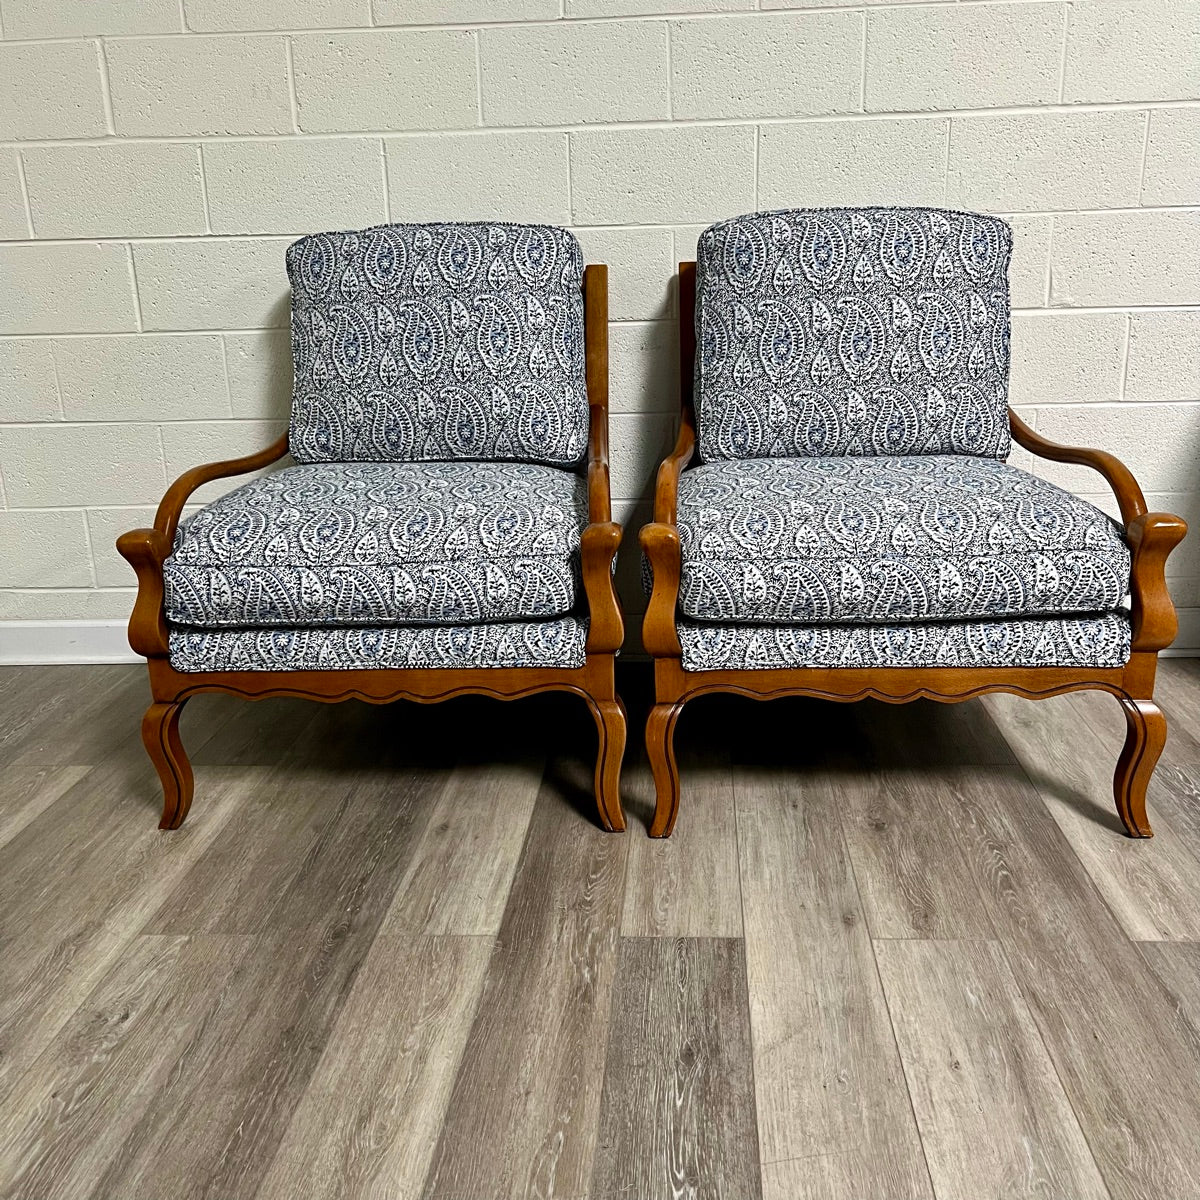 Pair Of Paisley Chairs